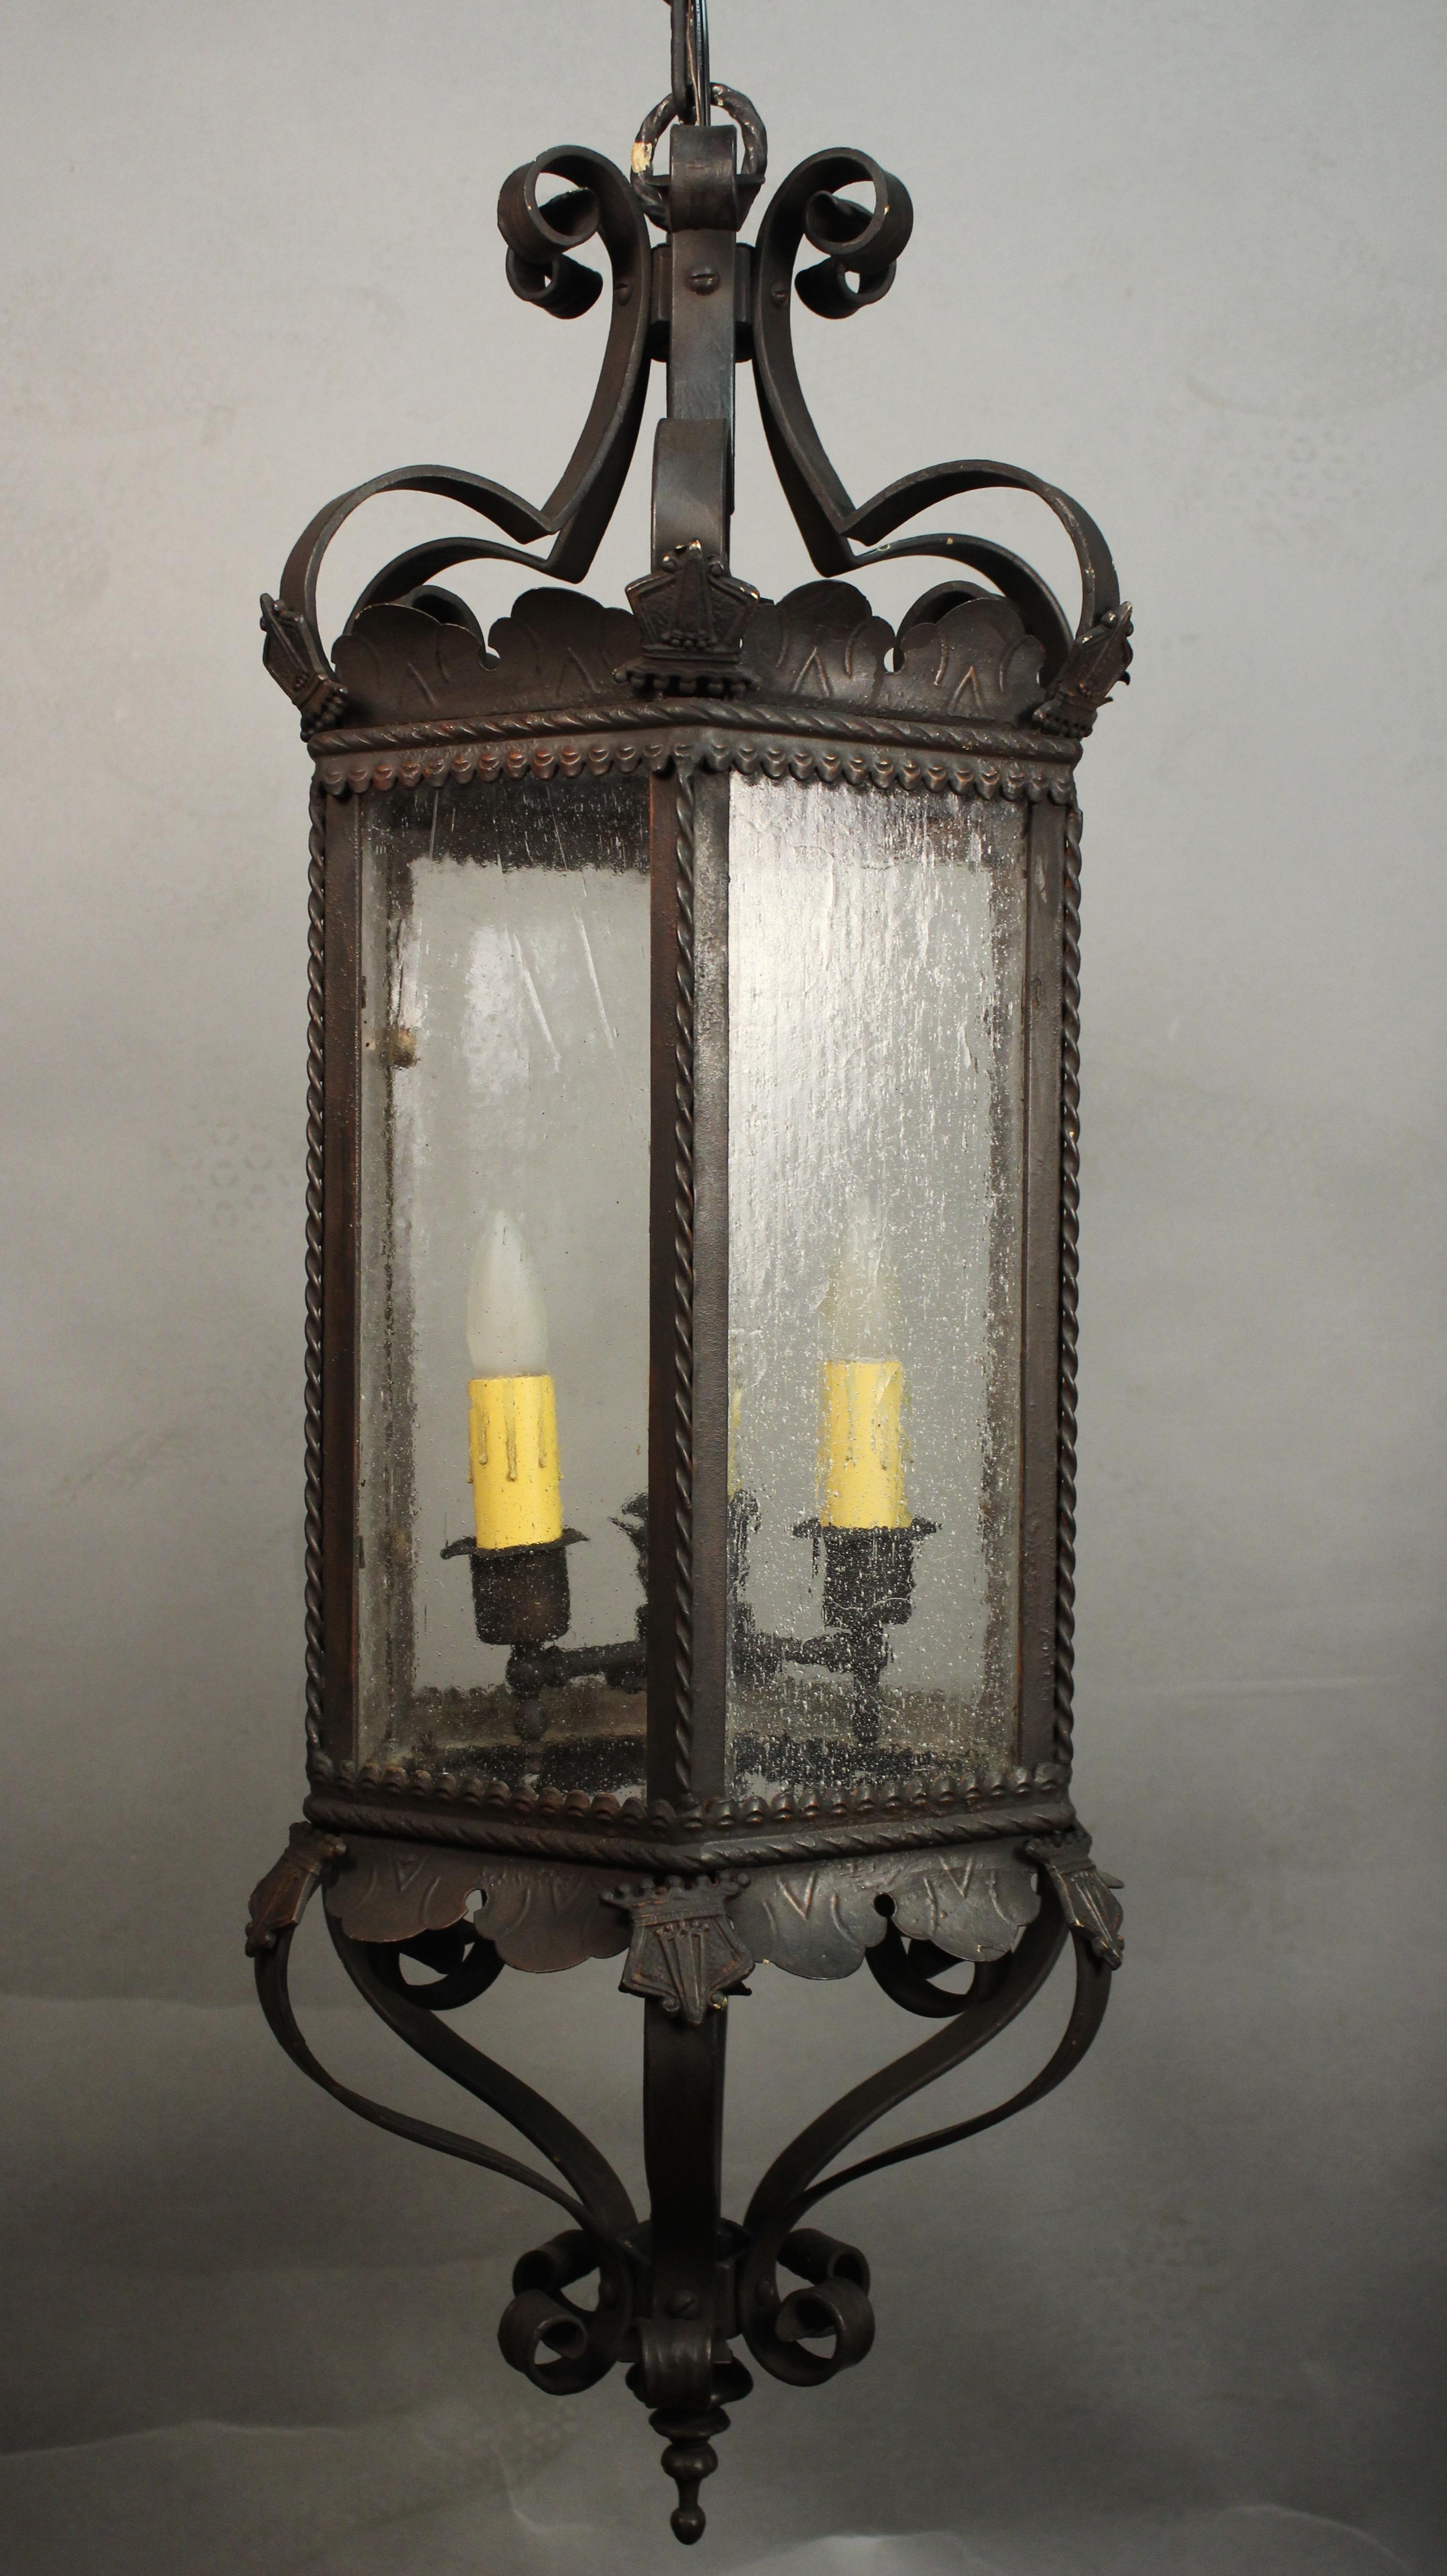 Spanish Colonial Very Large Spanish Revival 1920s Lantern Salvaged from Local Estate